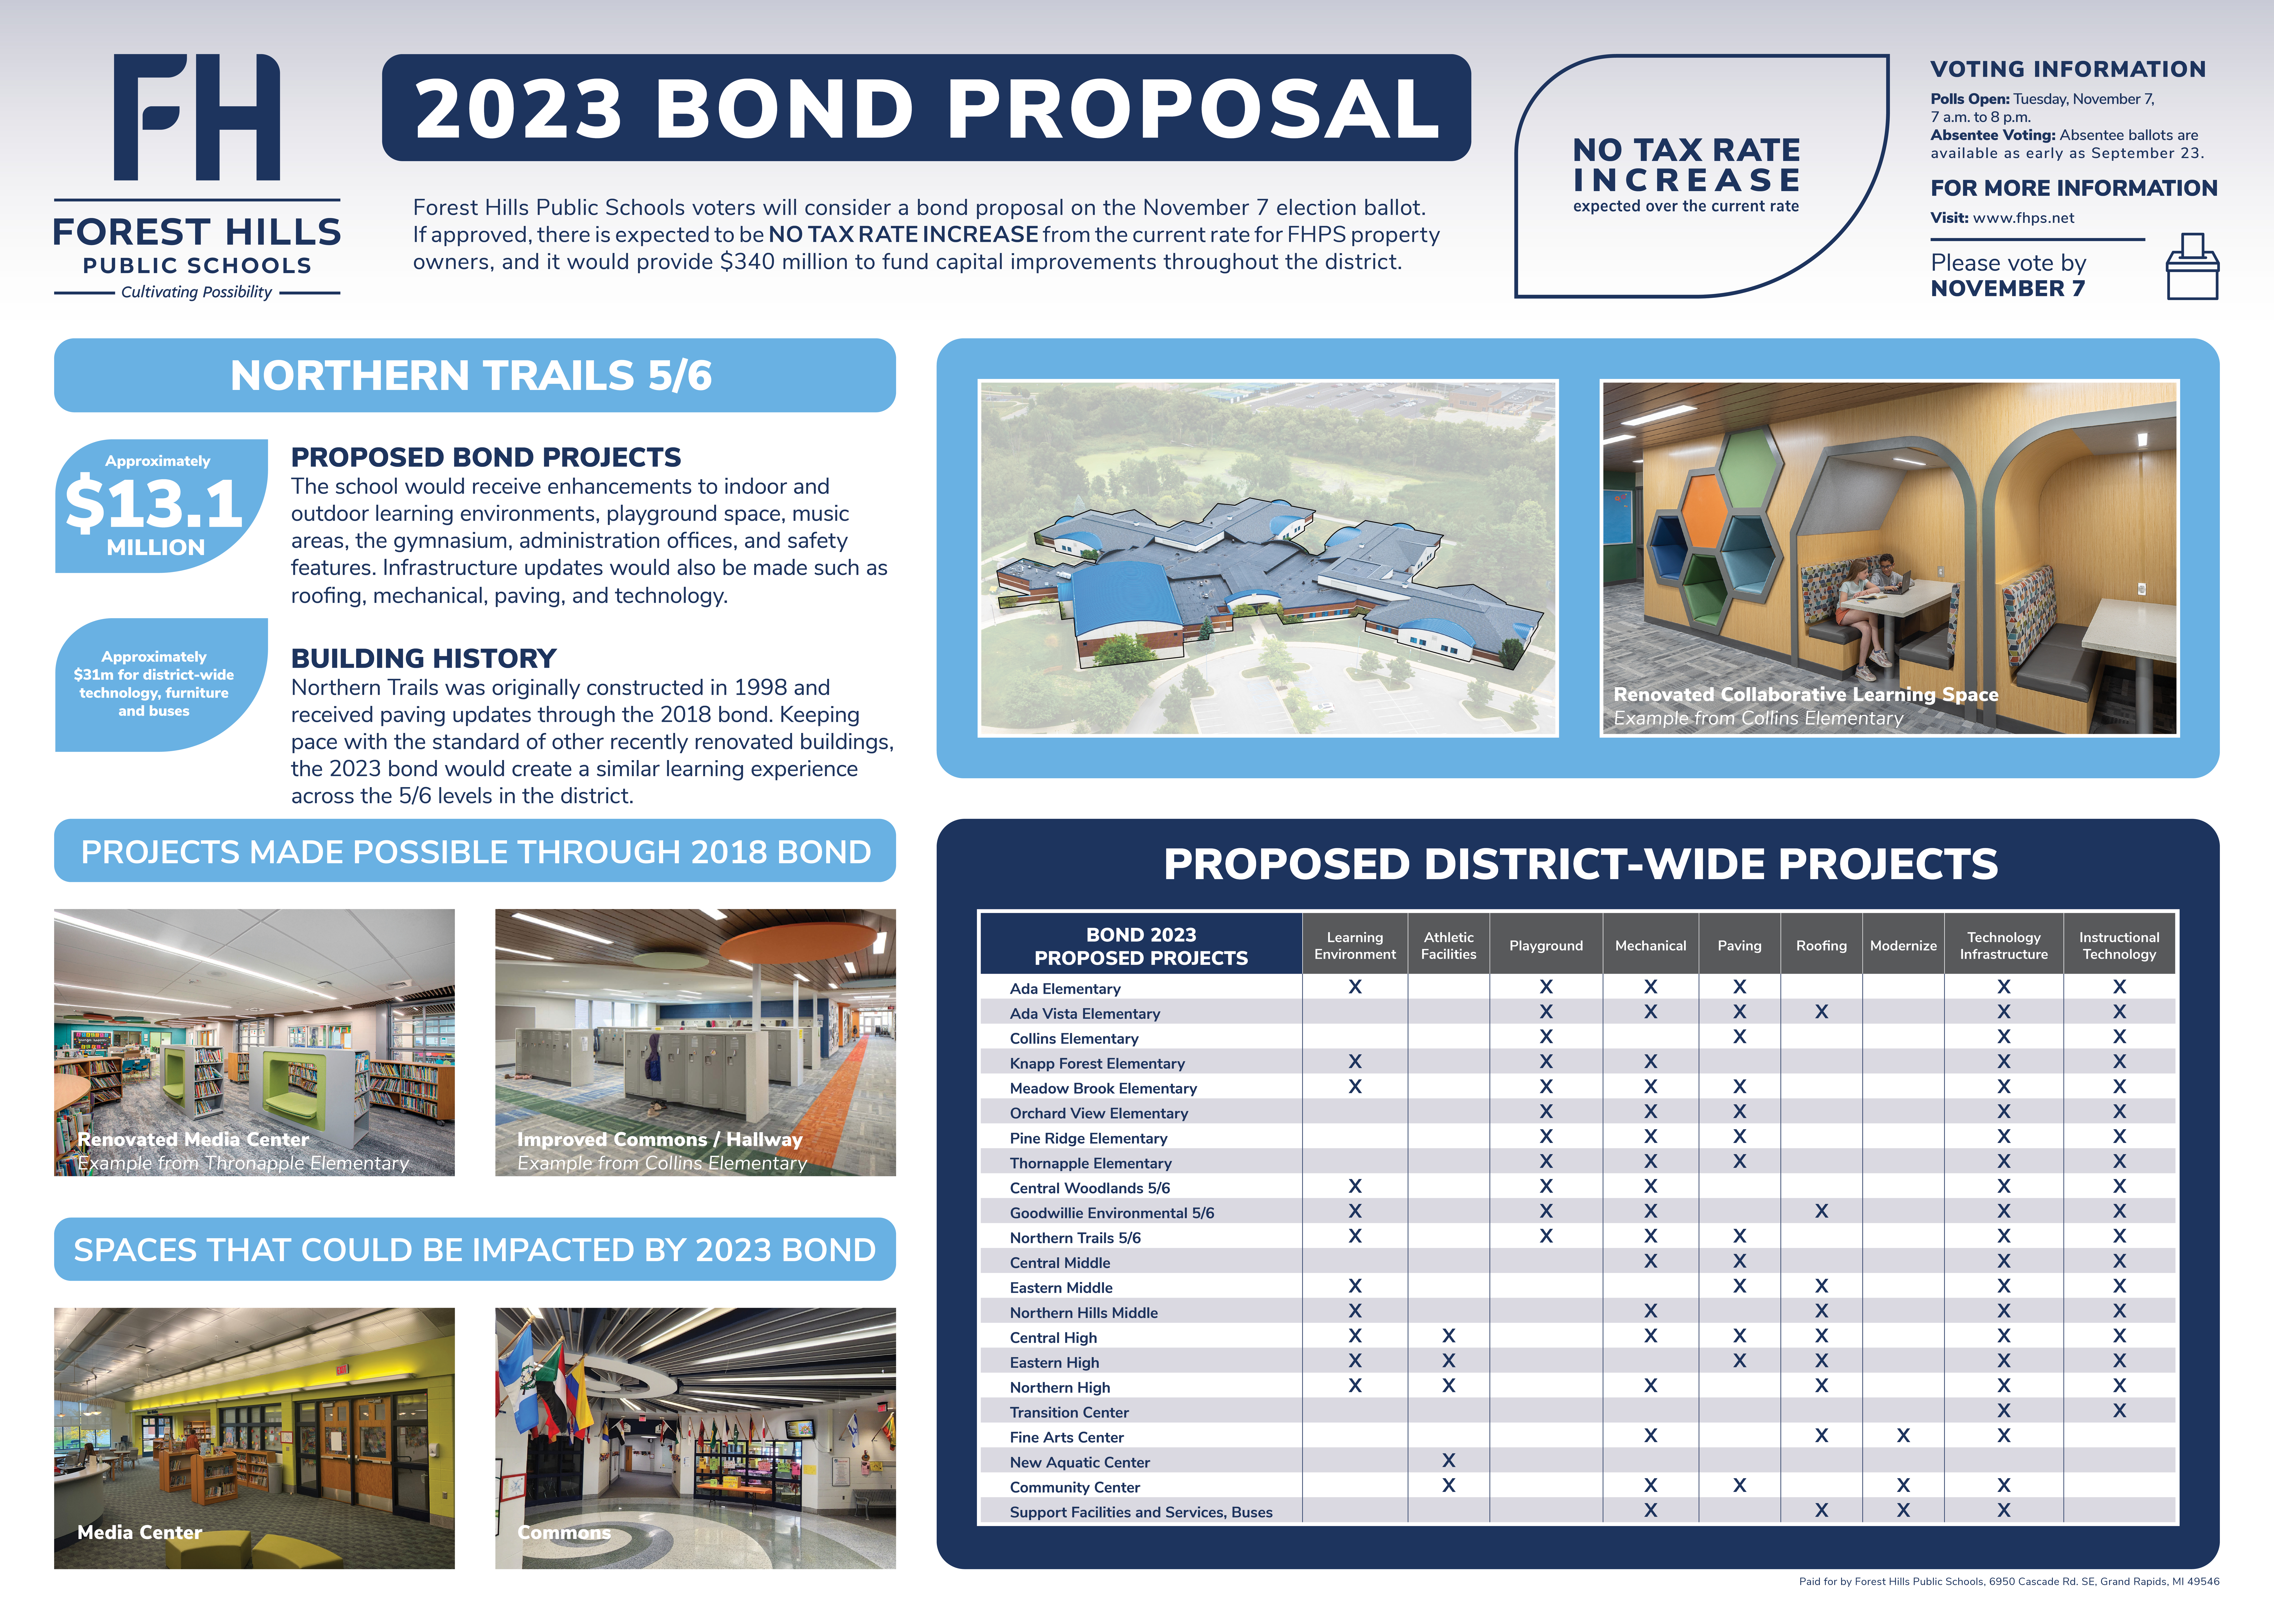 Northern Trails and pictures of the existing building and bond project pictures from 2018 and spaces that could be impacted by the 2023 bond.